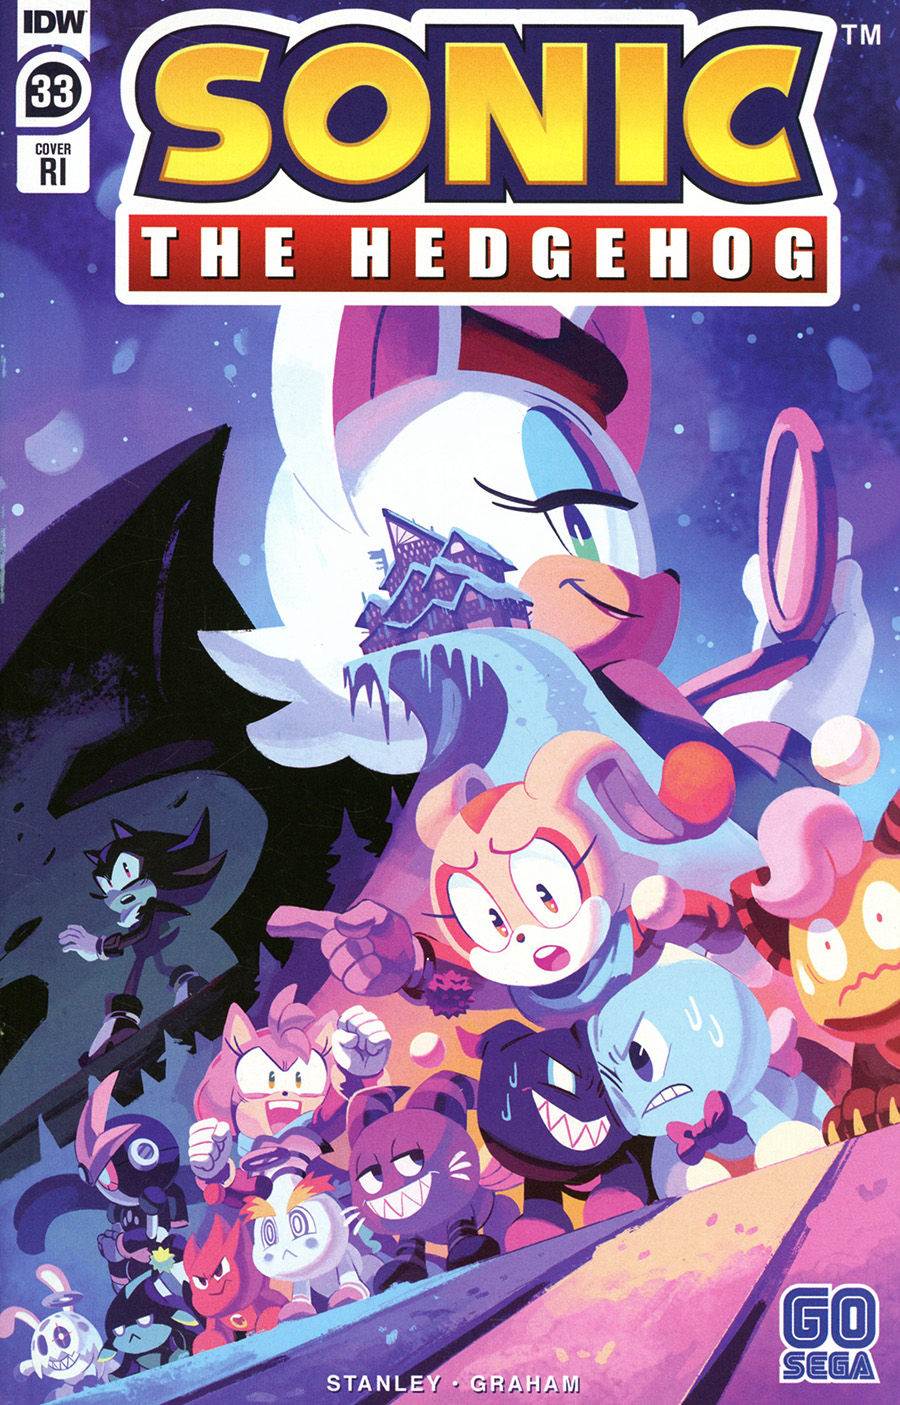 Sonic The Hedgehog Vol 3 #33 Cover C Incentive Nathalie Fourdraine Variant Cover